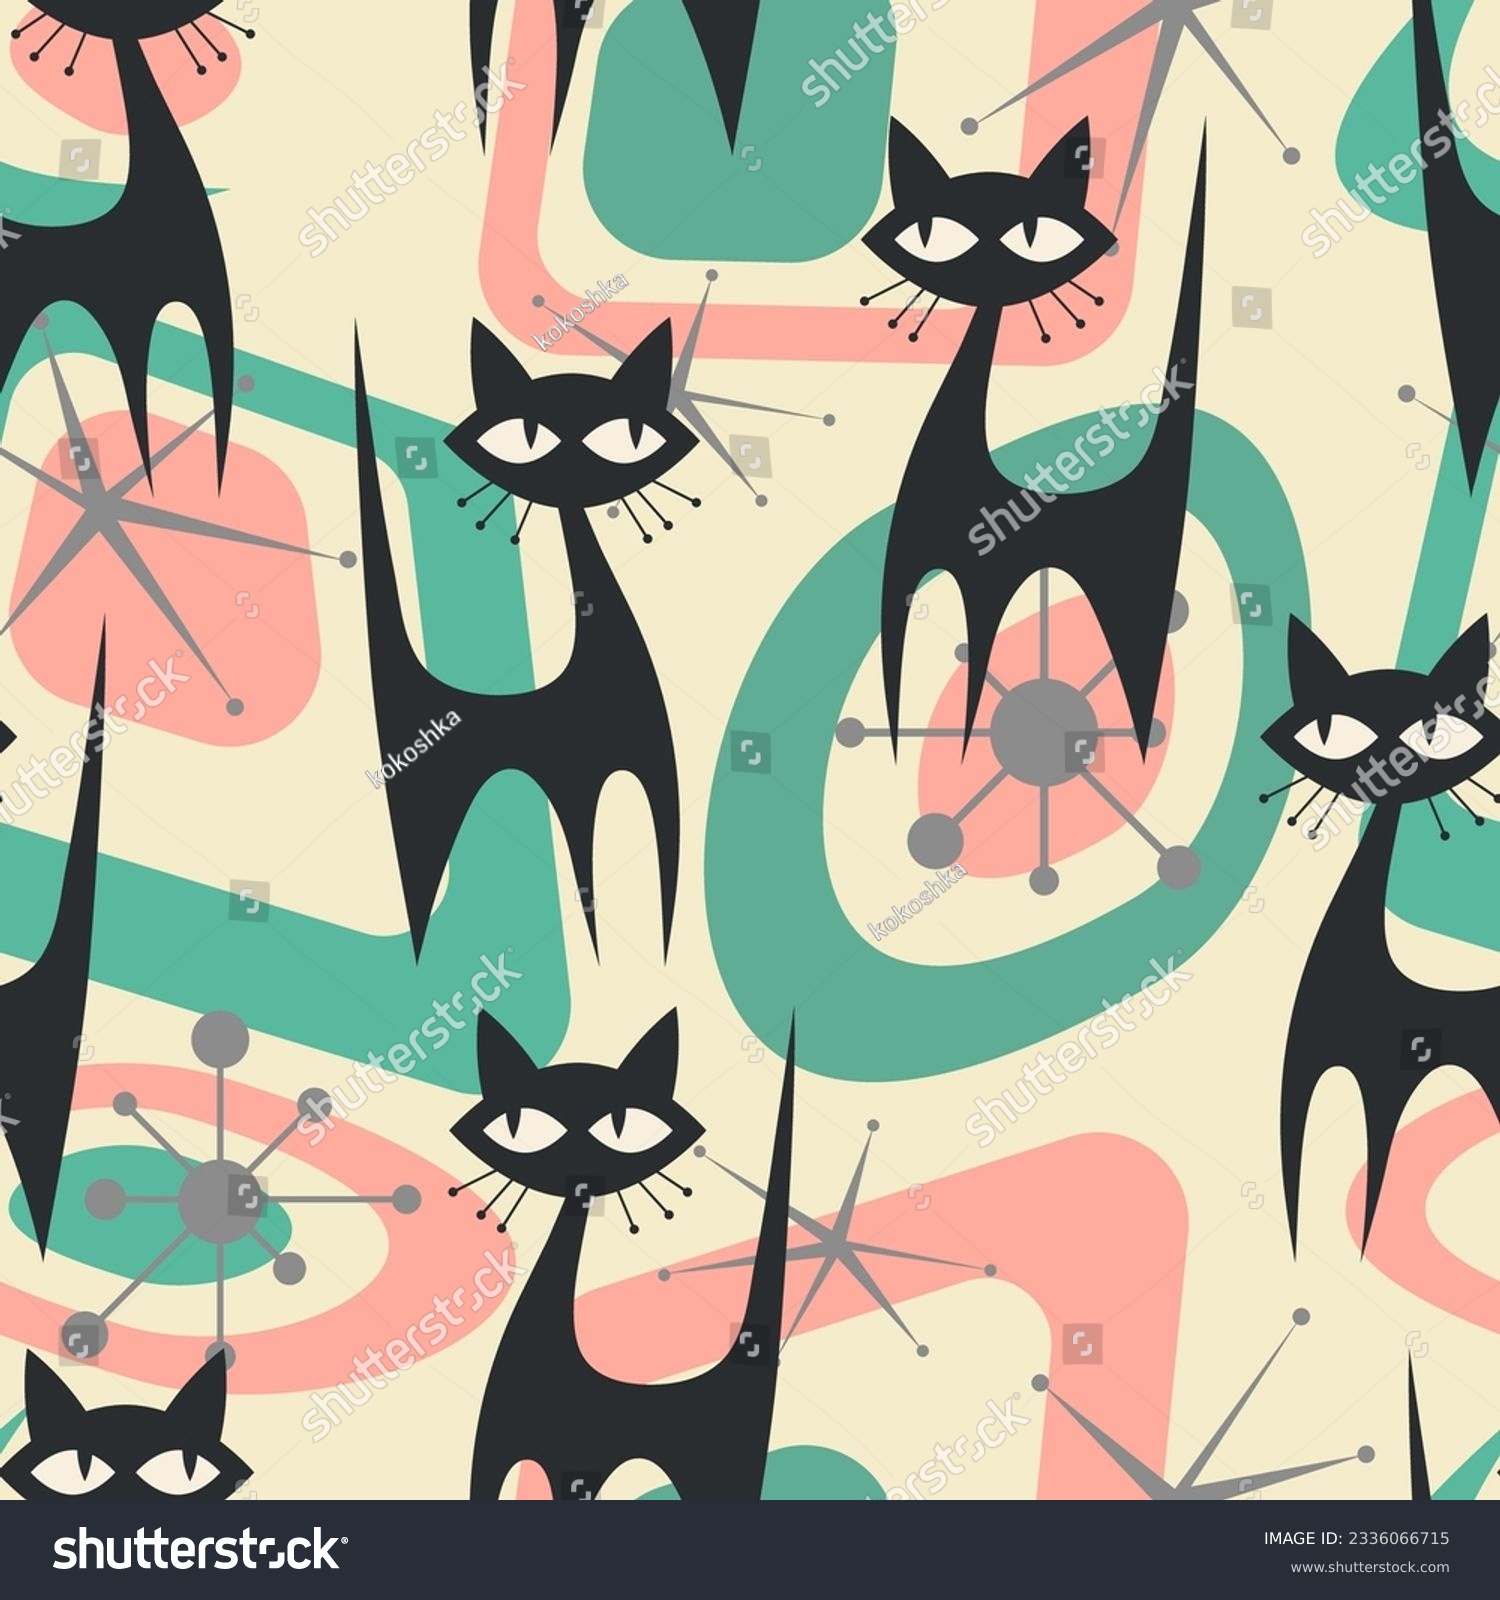 SVG of 1950s Mid Century Modern Atomic Black Cats and Starbursts pattern. Seamless vector background in fifties style svg